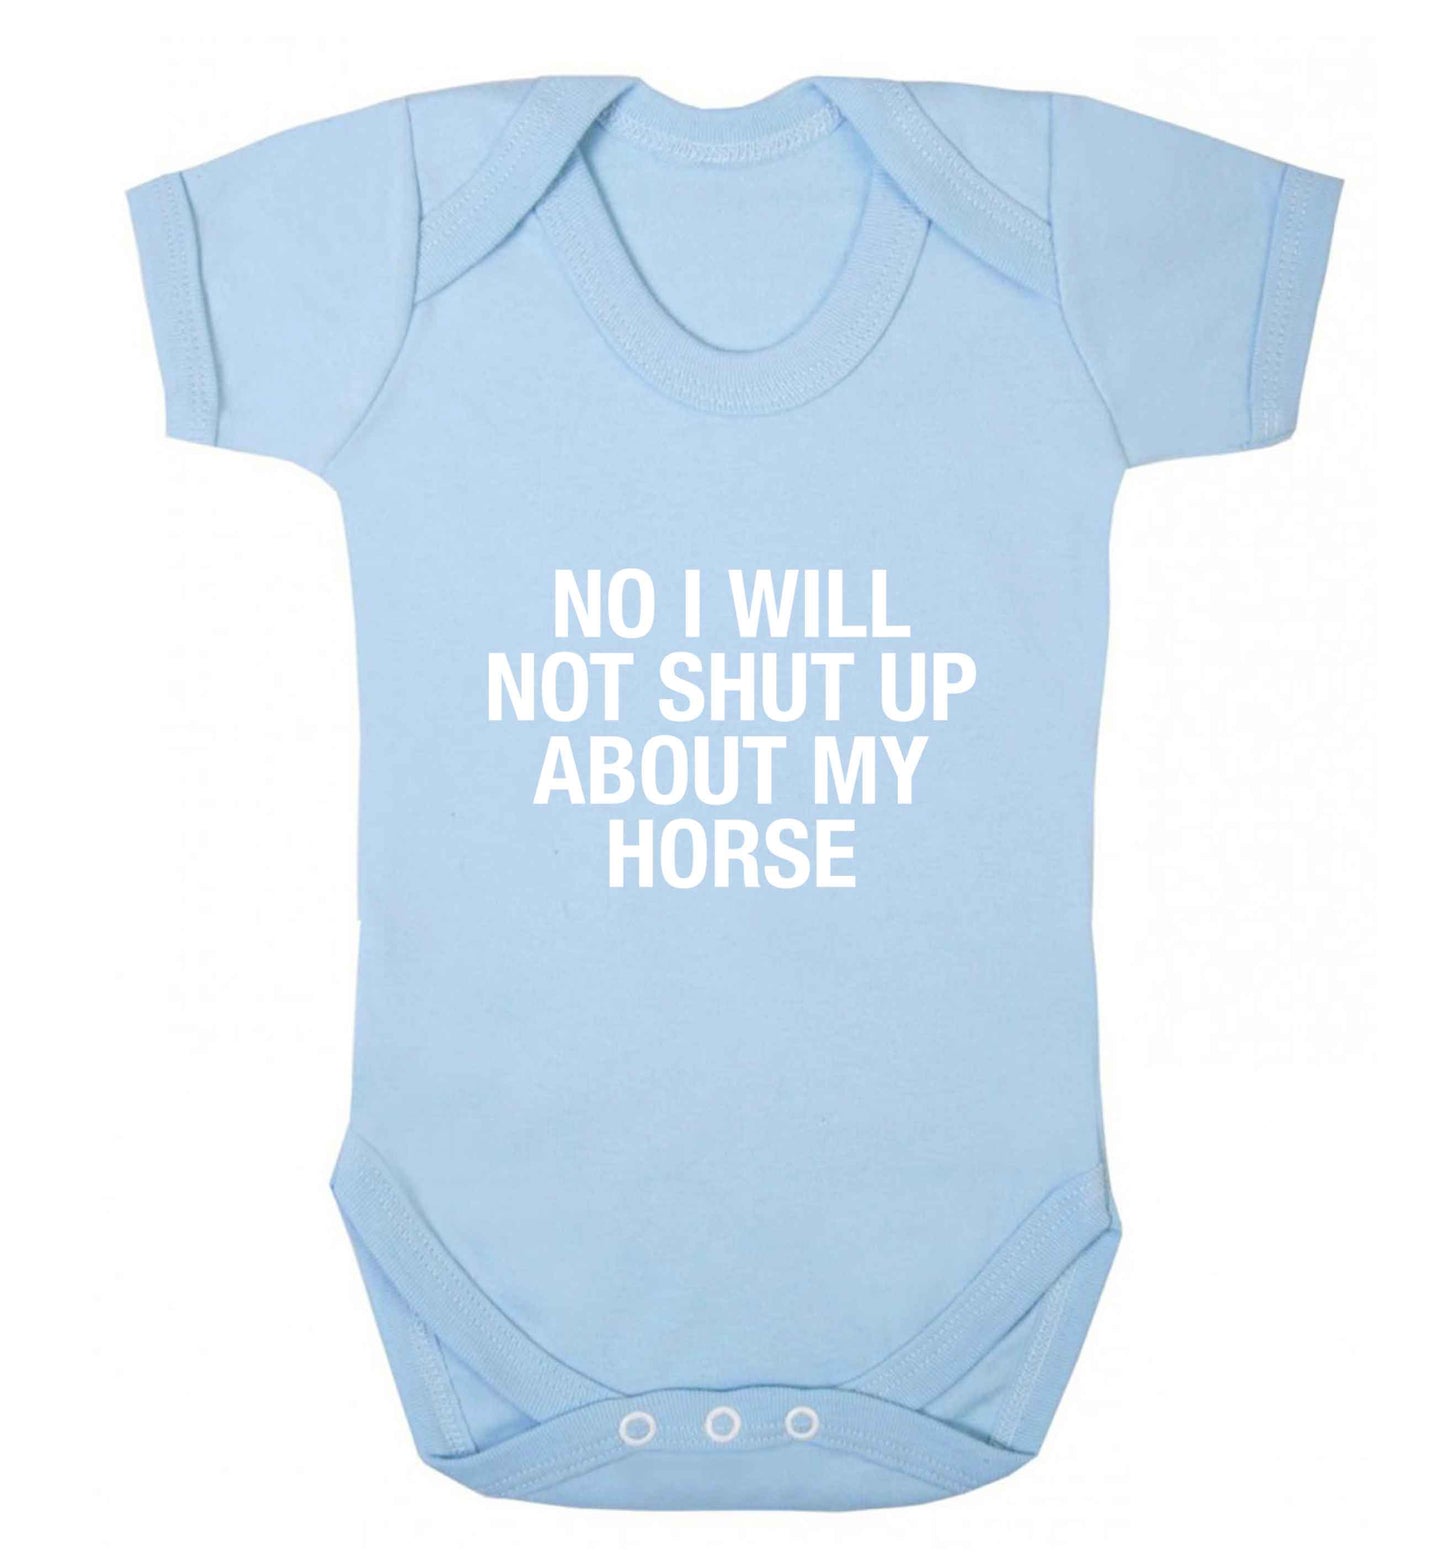 No I will not shut up talking about my horse baby vest pale blue 18-24 months